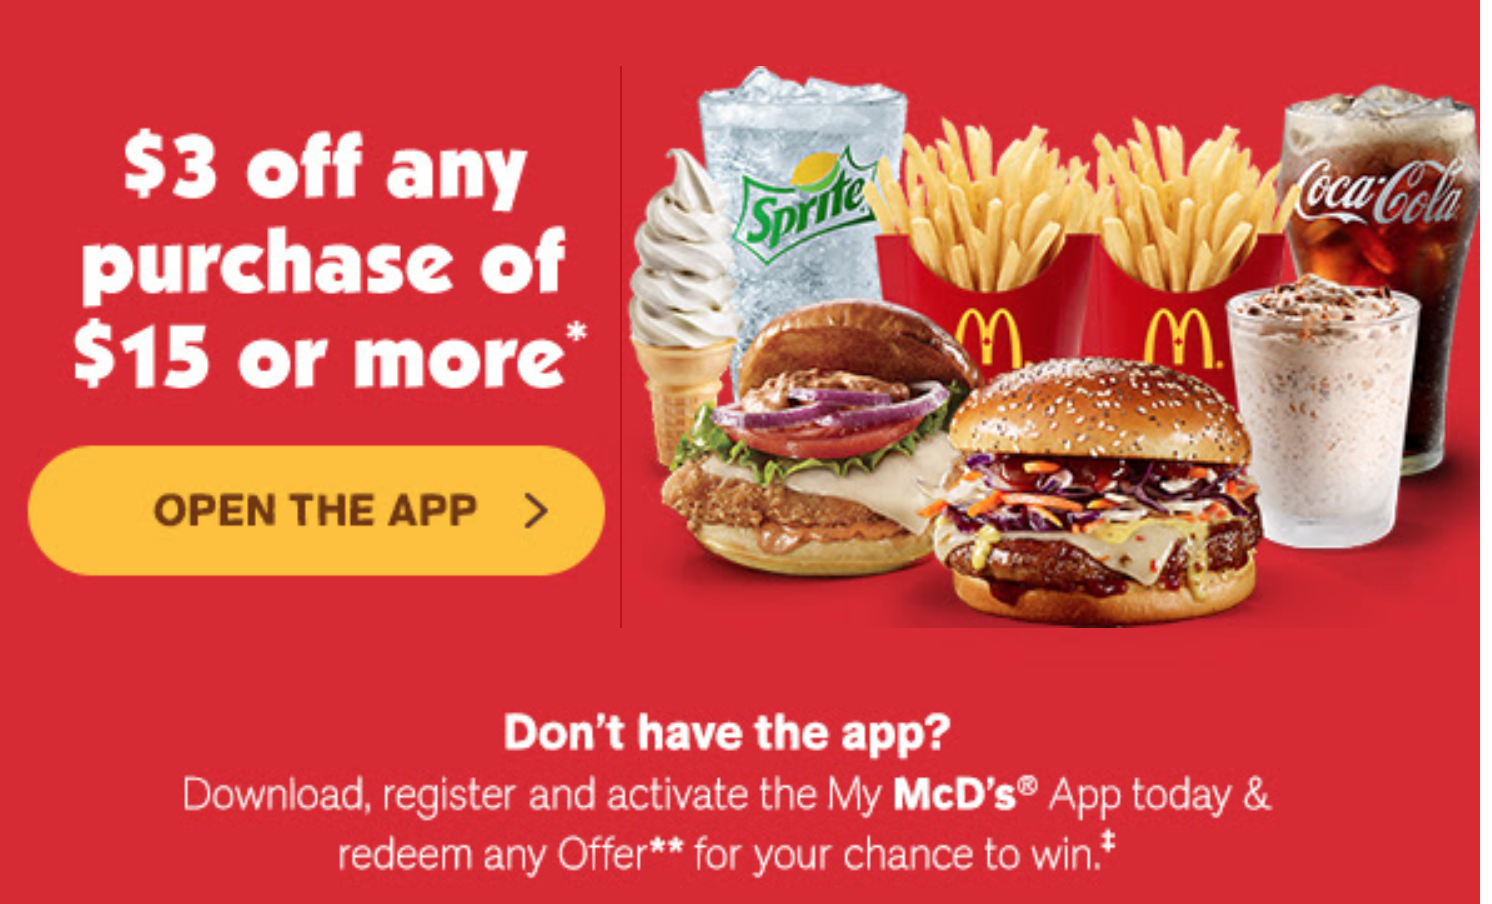 mcdonald-s-canada-offer-save-3-off-15-canadian-freebies-coupons